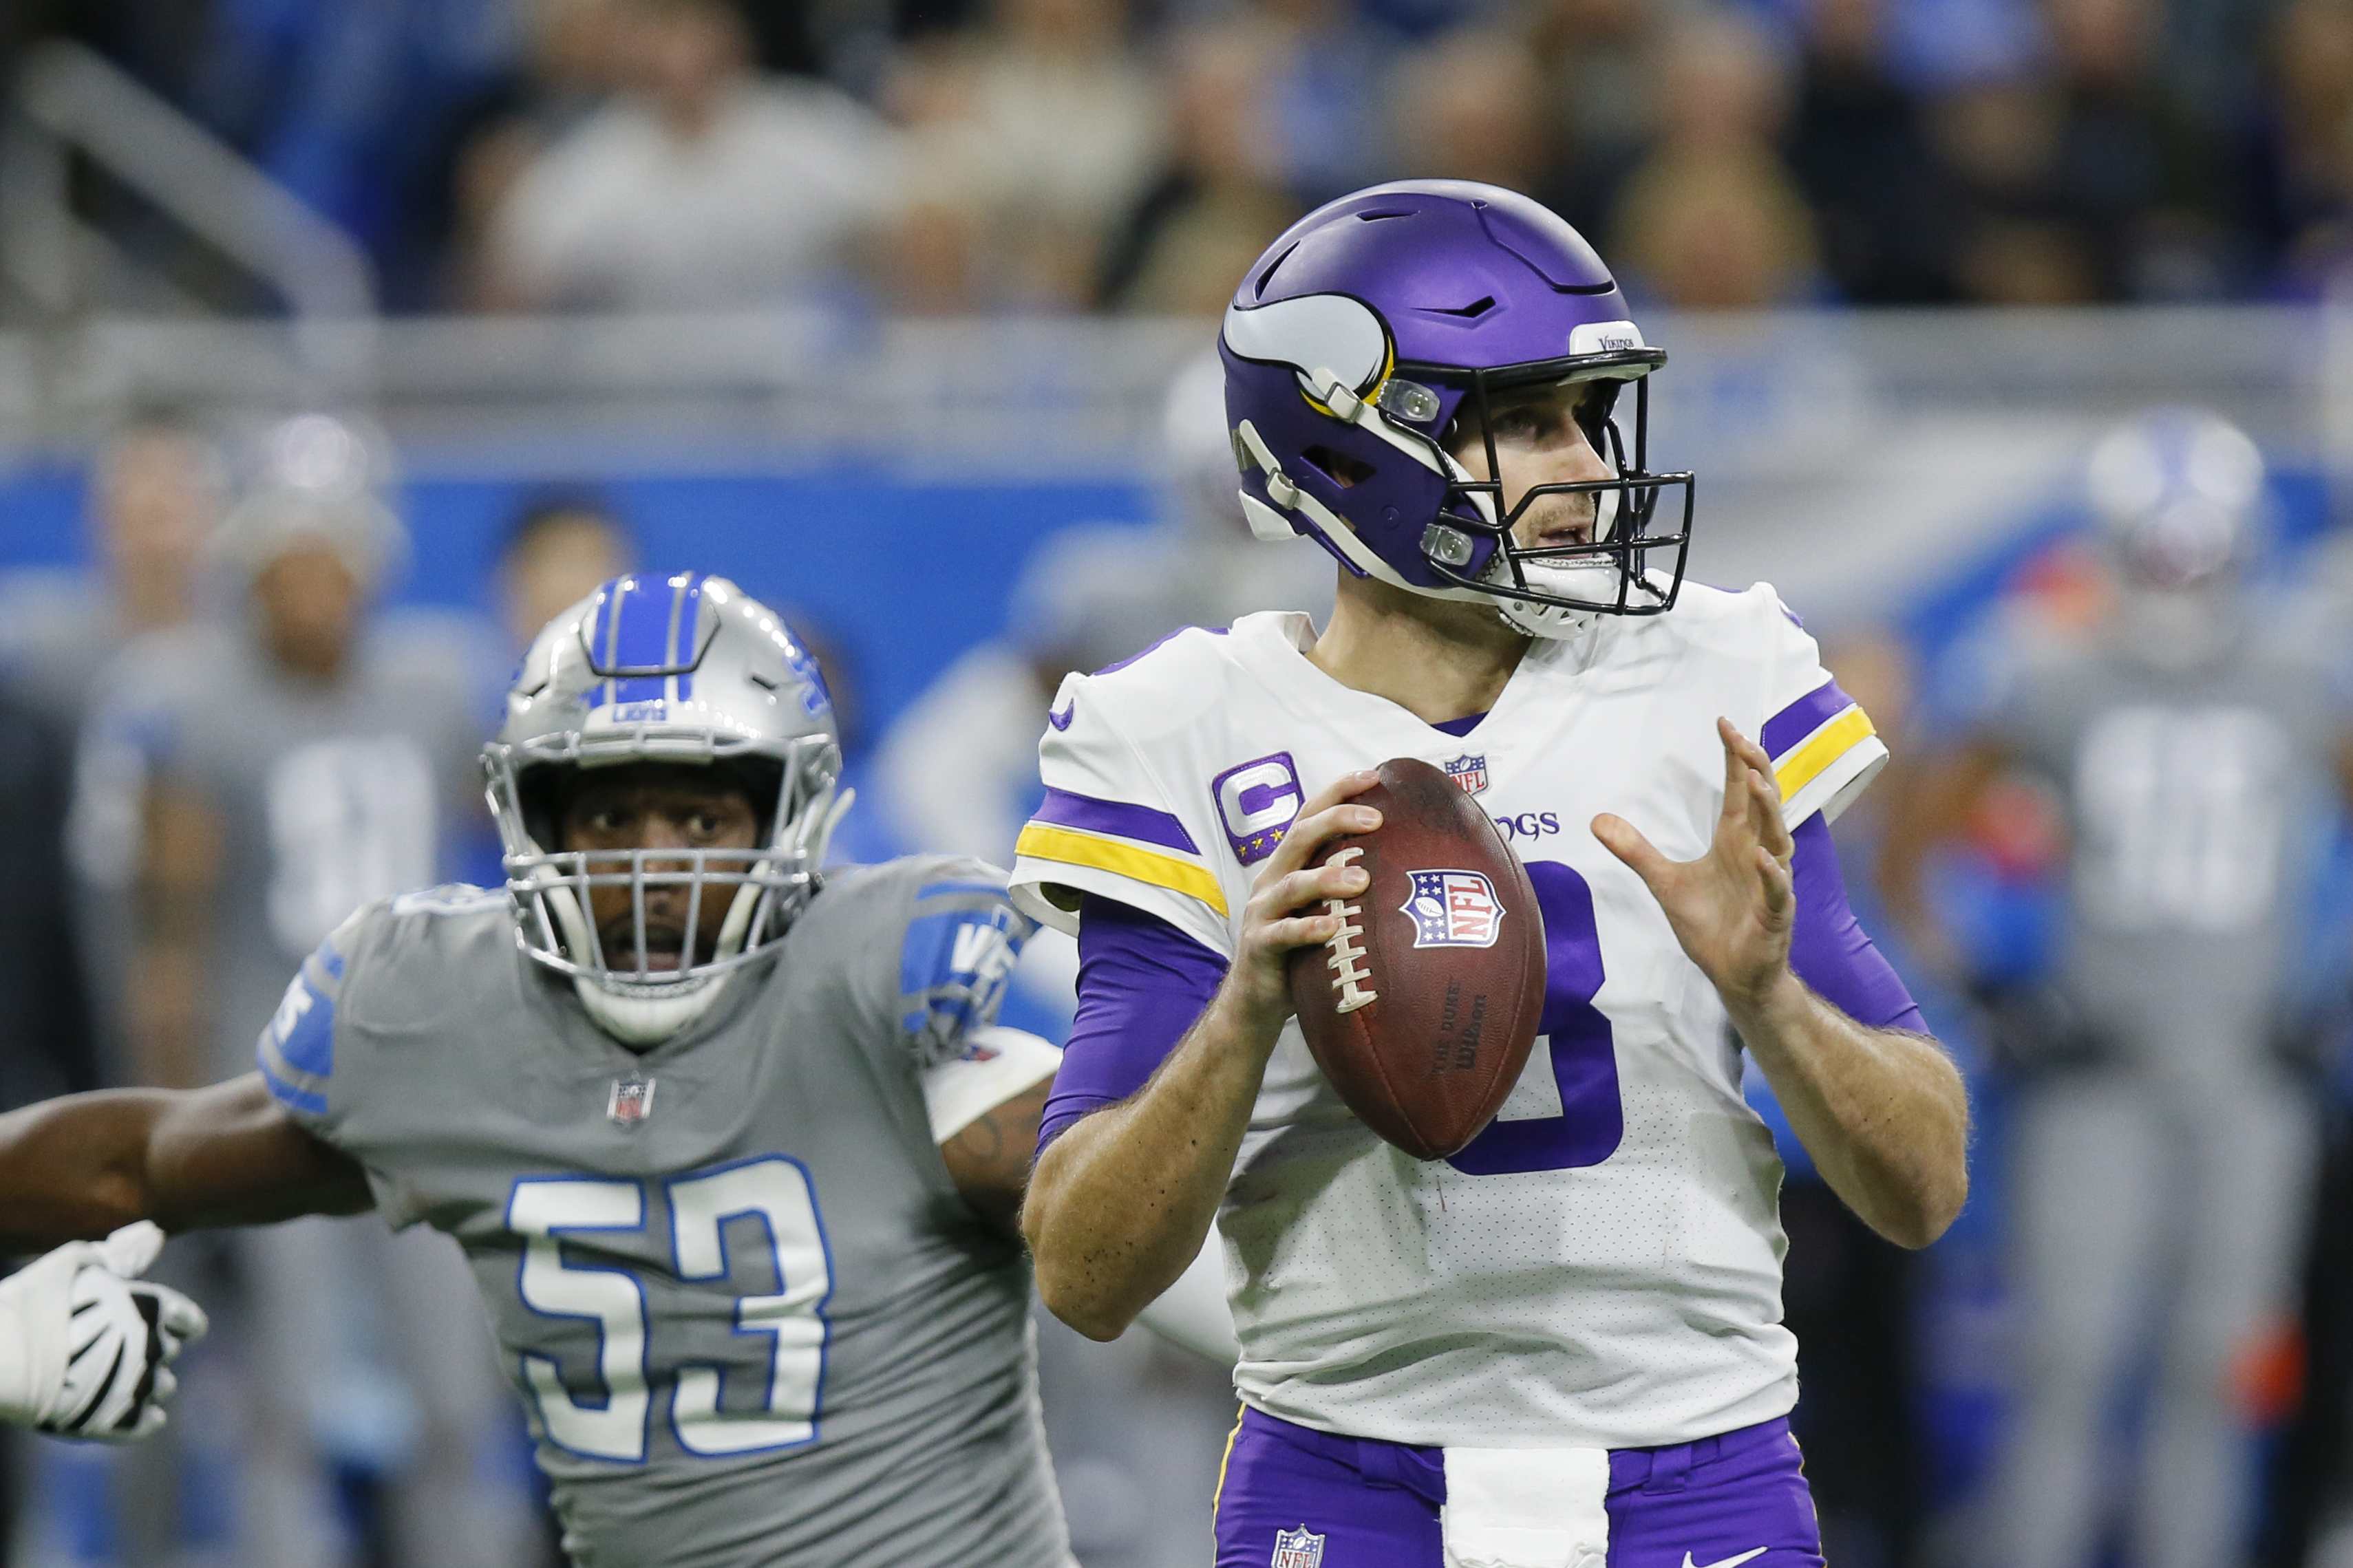 Vikings-Lions live stream (12/11): How to watch online, TV, time 